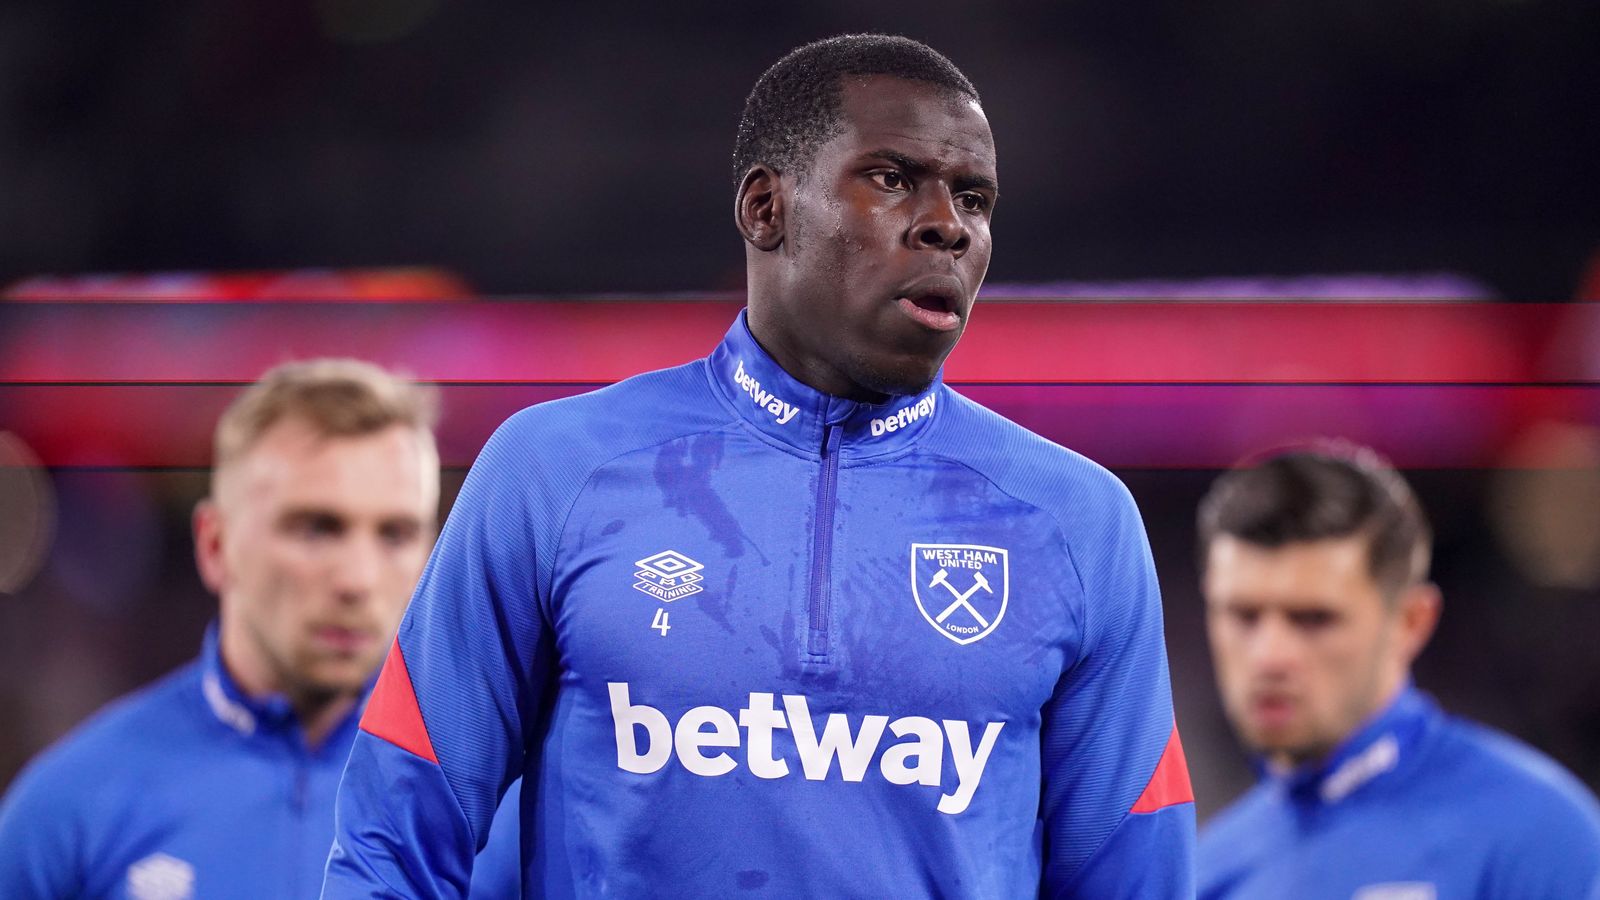 Kurt Zouma: David Moyes Confirms Defender Will Be Available For West Ham Leicester Clash Amid Cat Incident